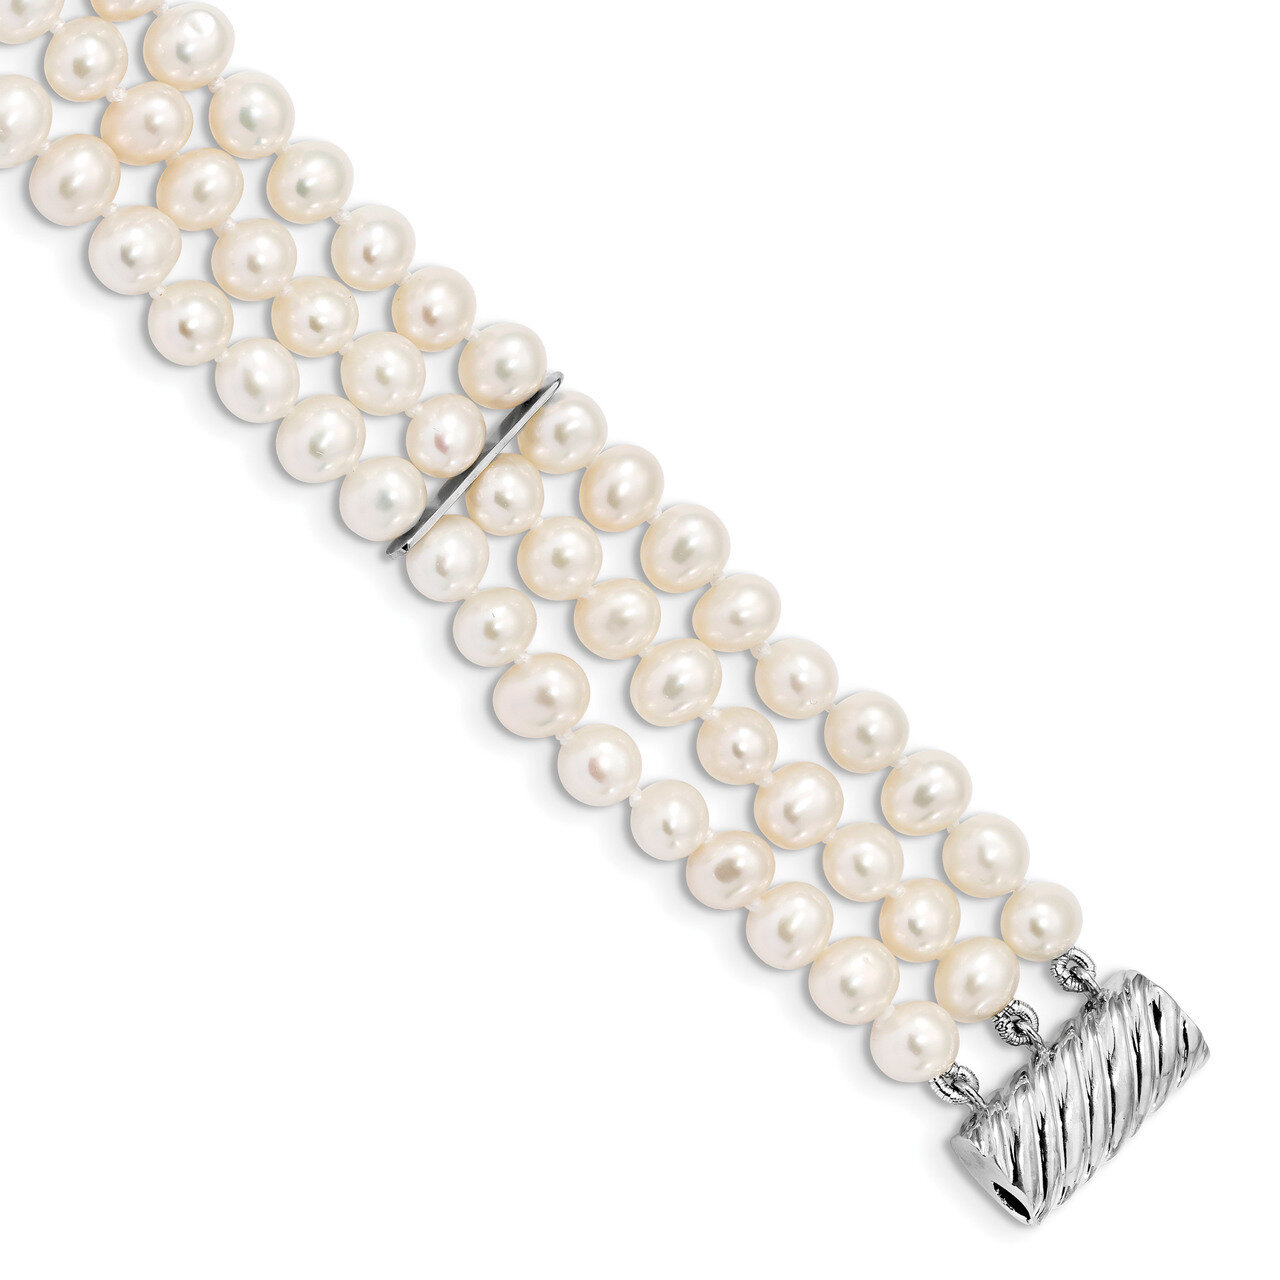 6-7mm White Cultured Freshwater Pearl 3 Strand Bracelet 7 Inch Sterling Silver Rhodium-plated QH5365-7.5